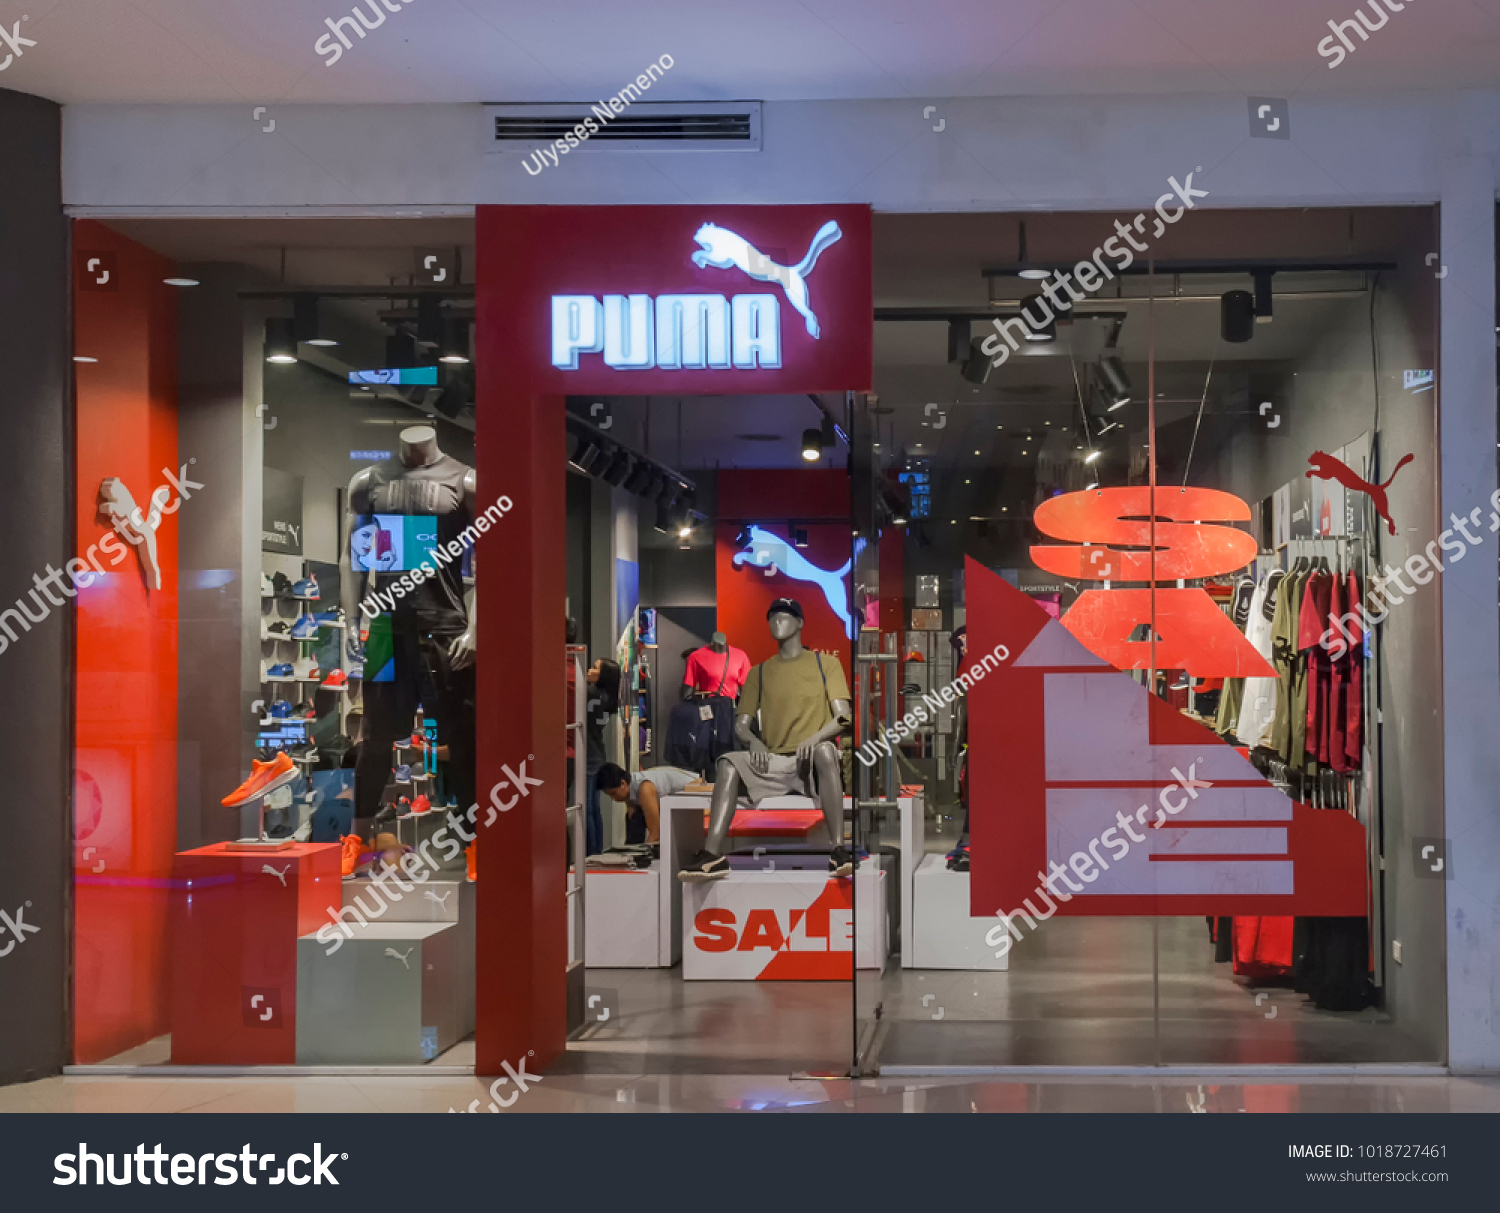 puma outlet philippines